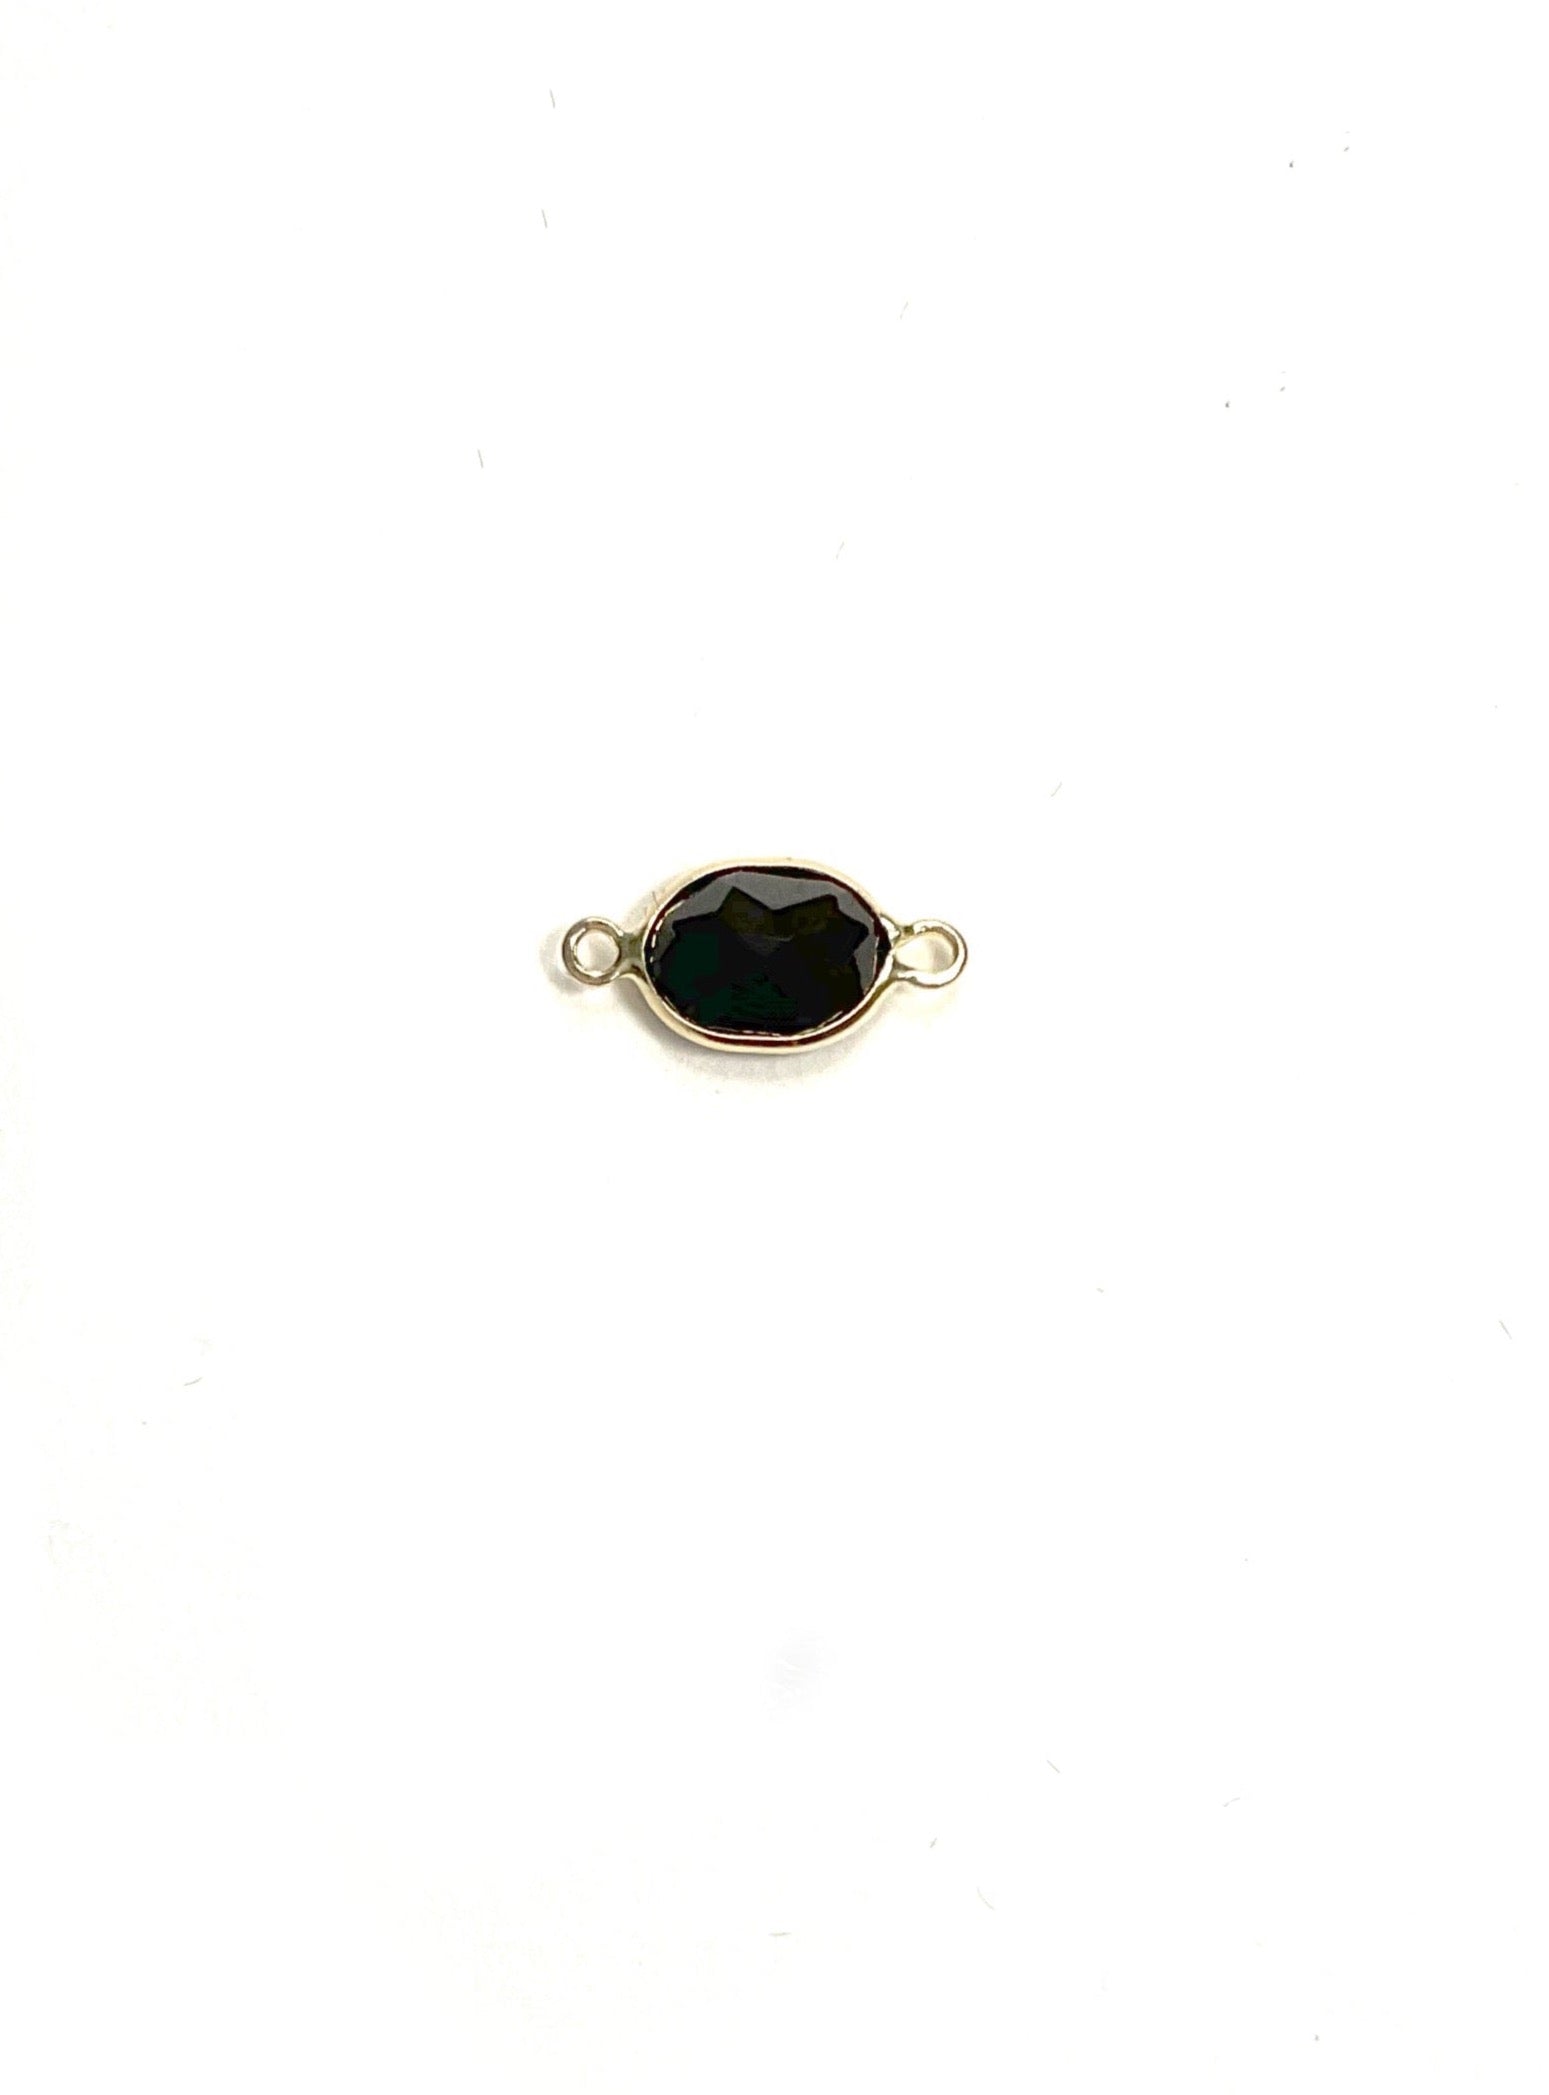 Oval Gemstone Charm in 14kt Gold